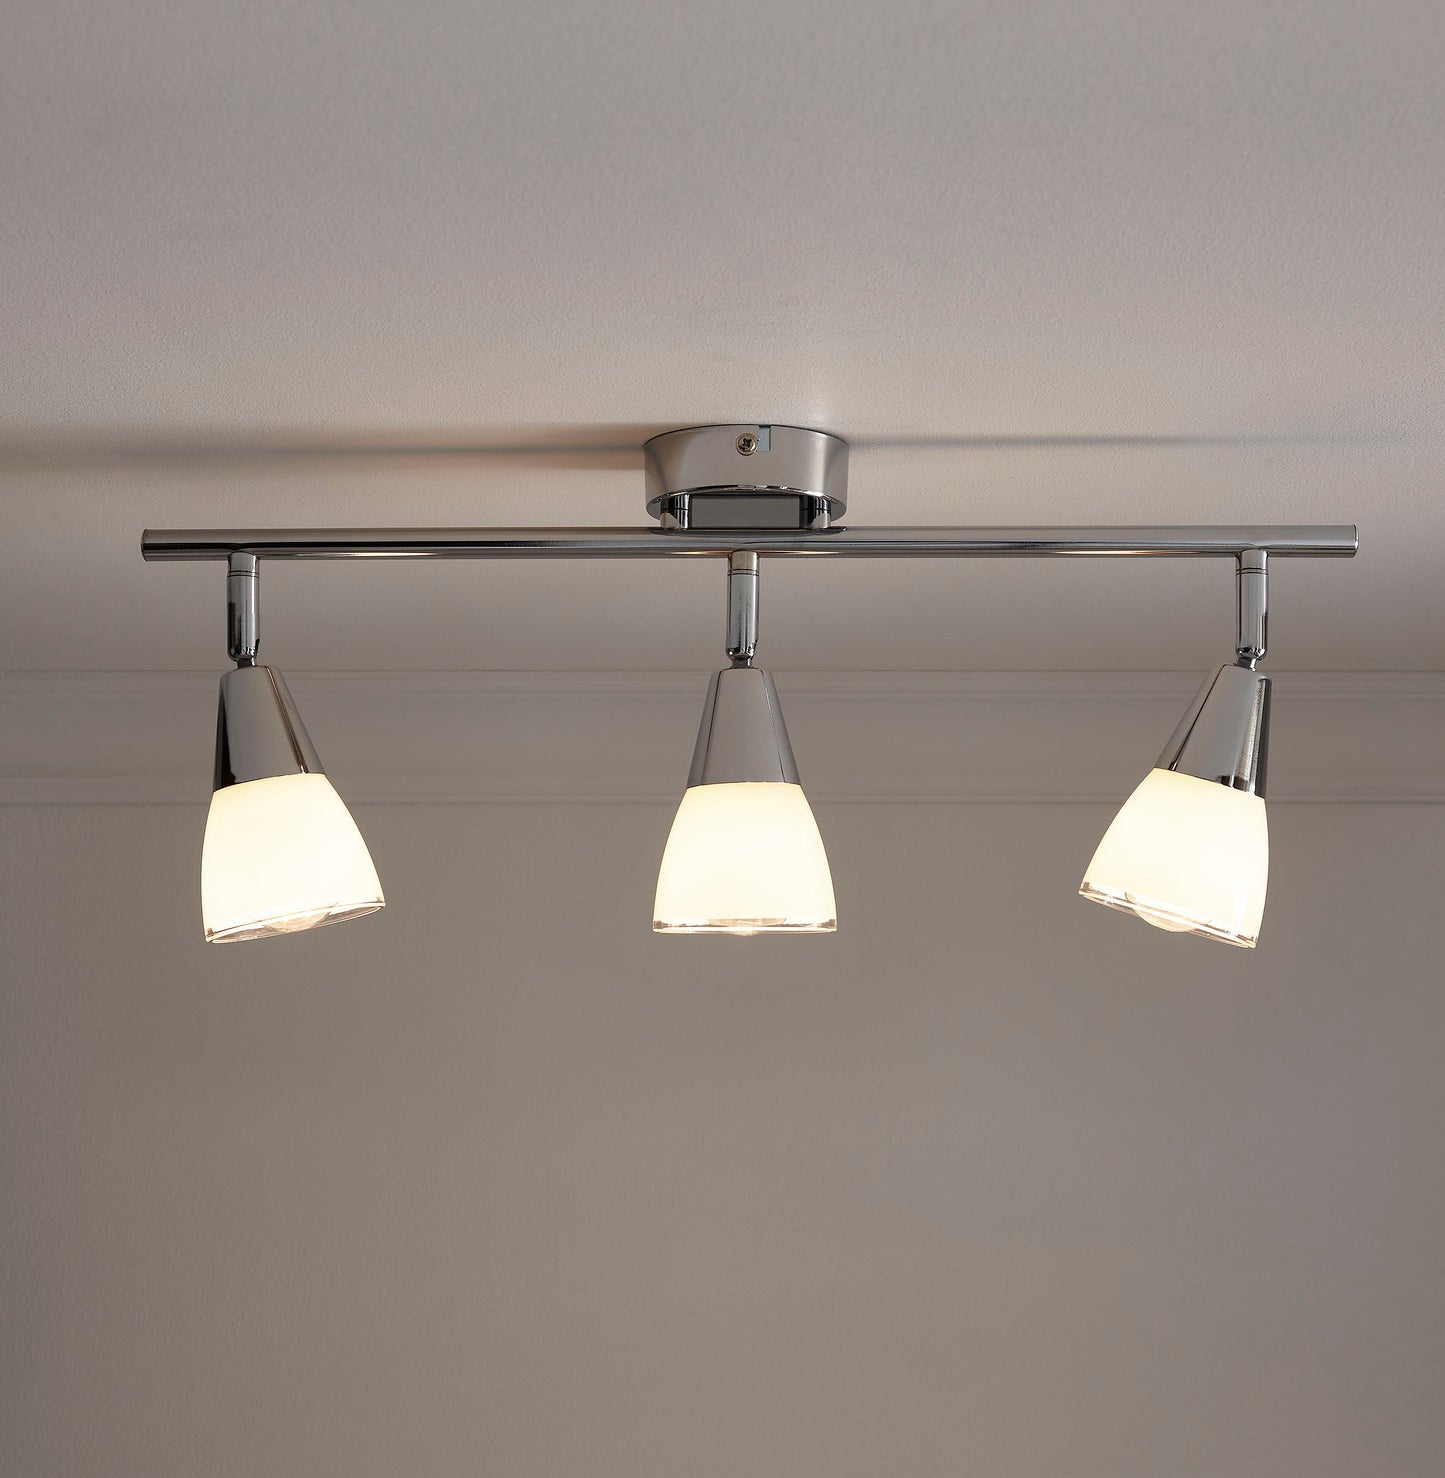 3 Light Chrome Ceiling Fitting on a Single bar with Adjustable heads 